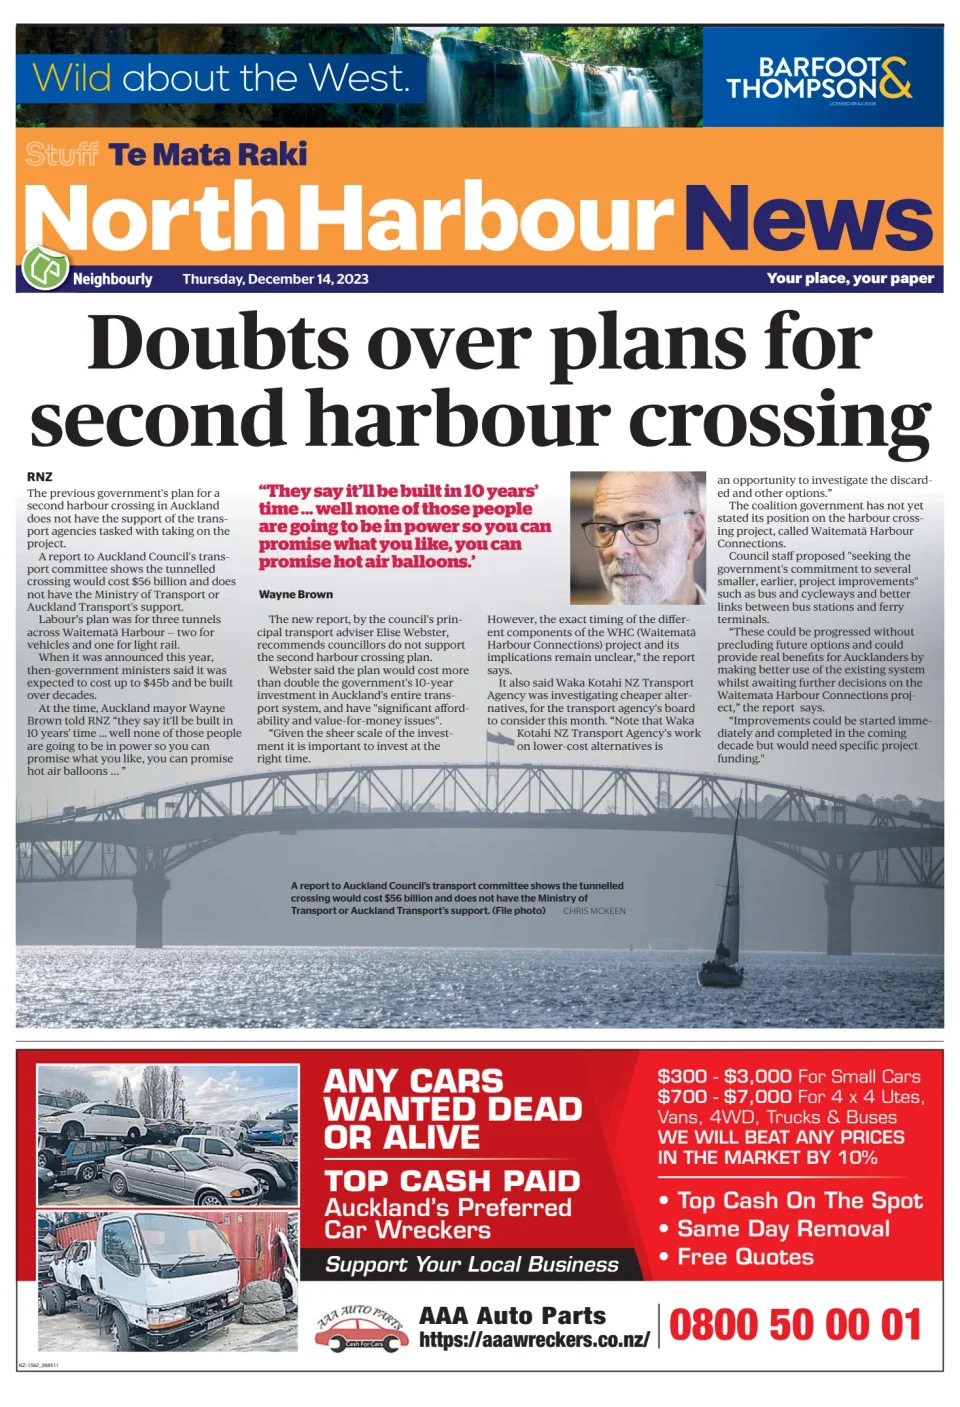 North Harbour News